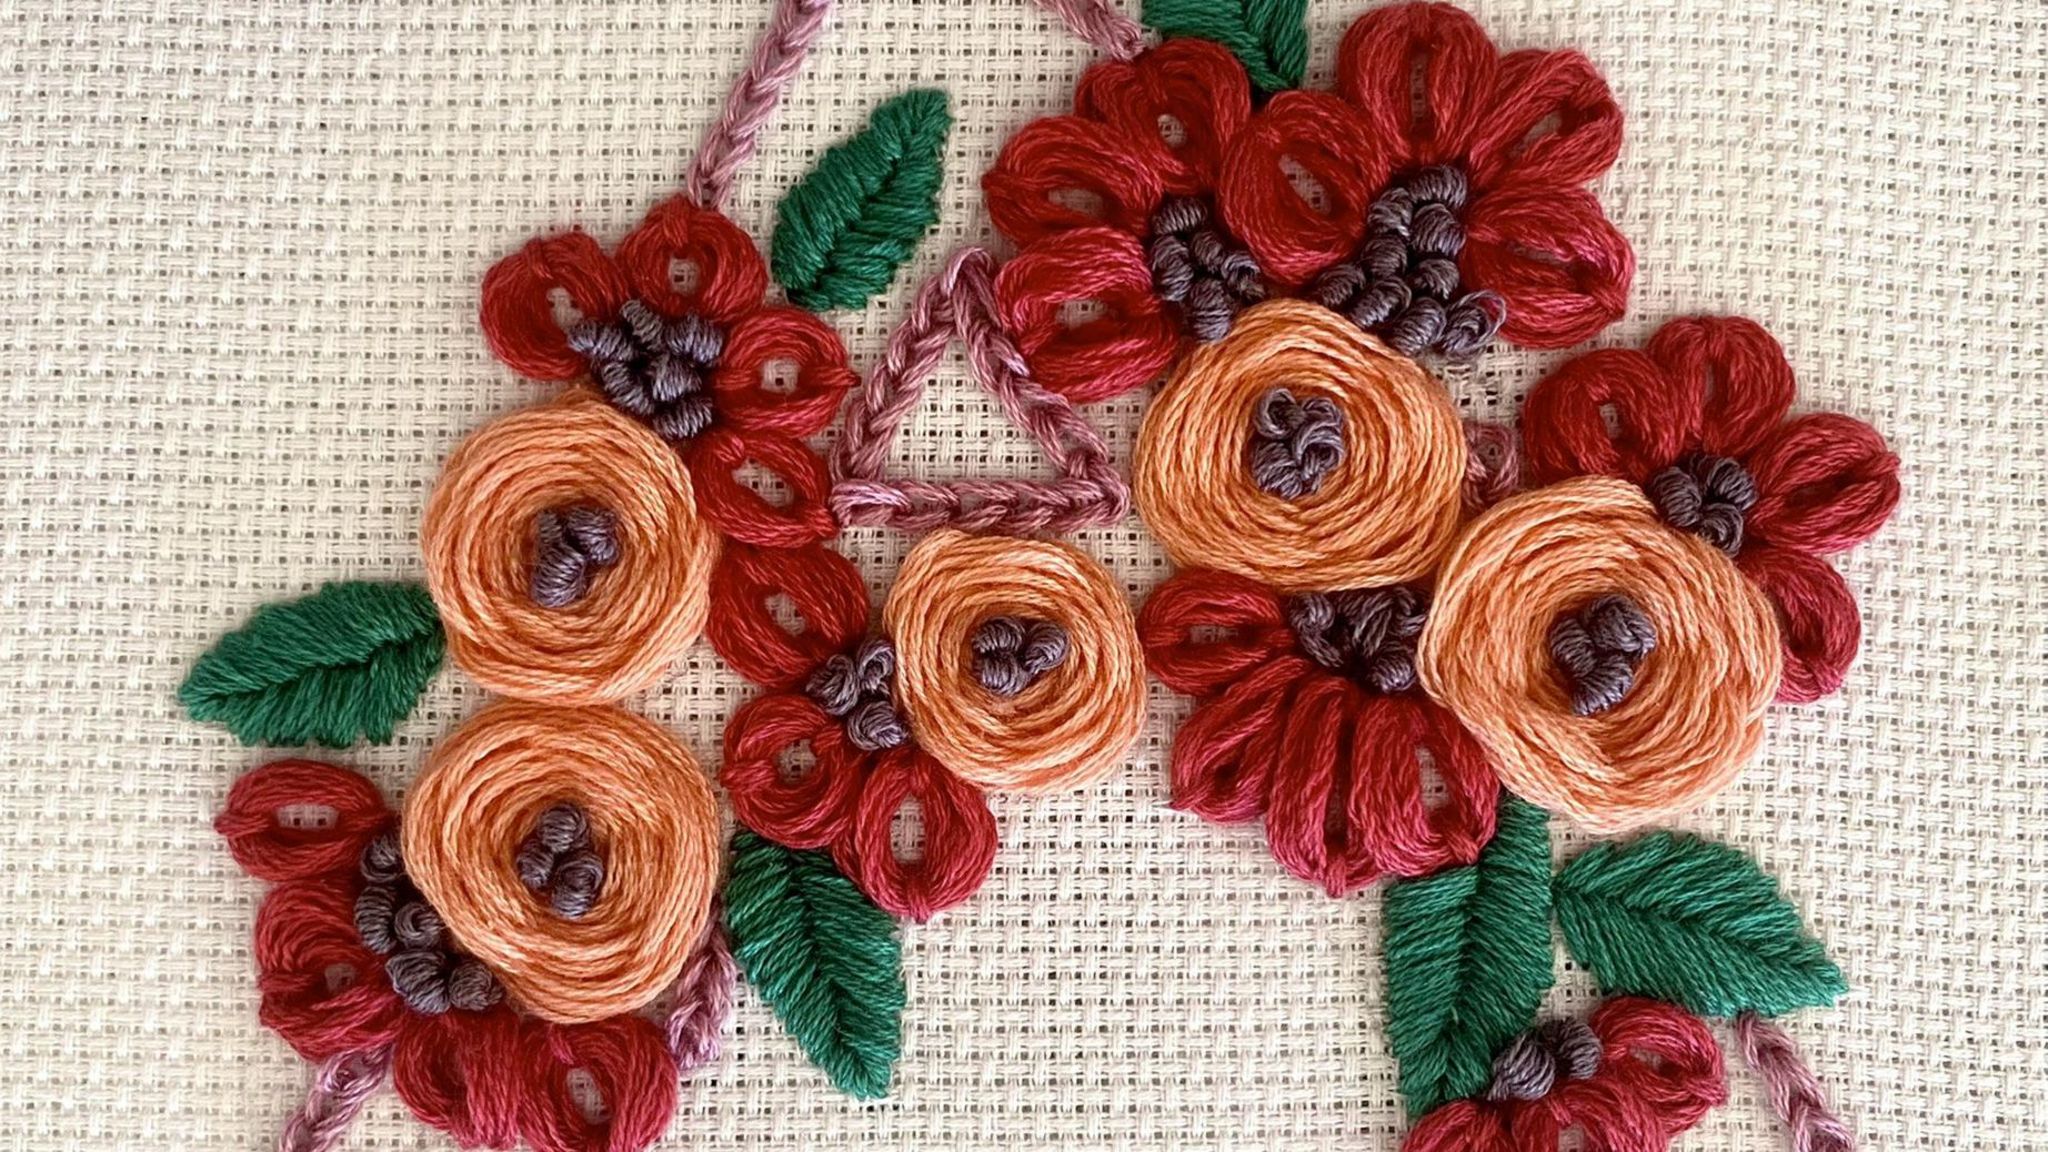 A piece of embroidery mad e up of orange and red flowers with green leaves